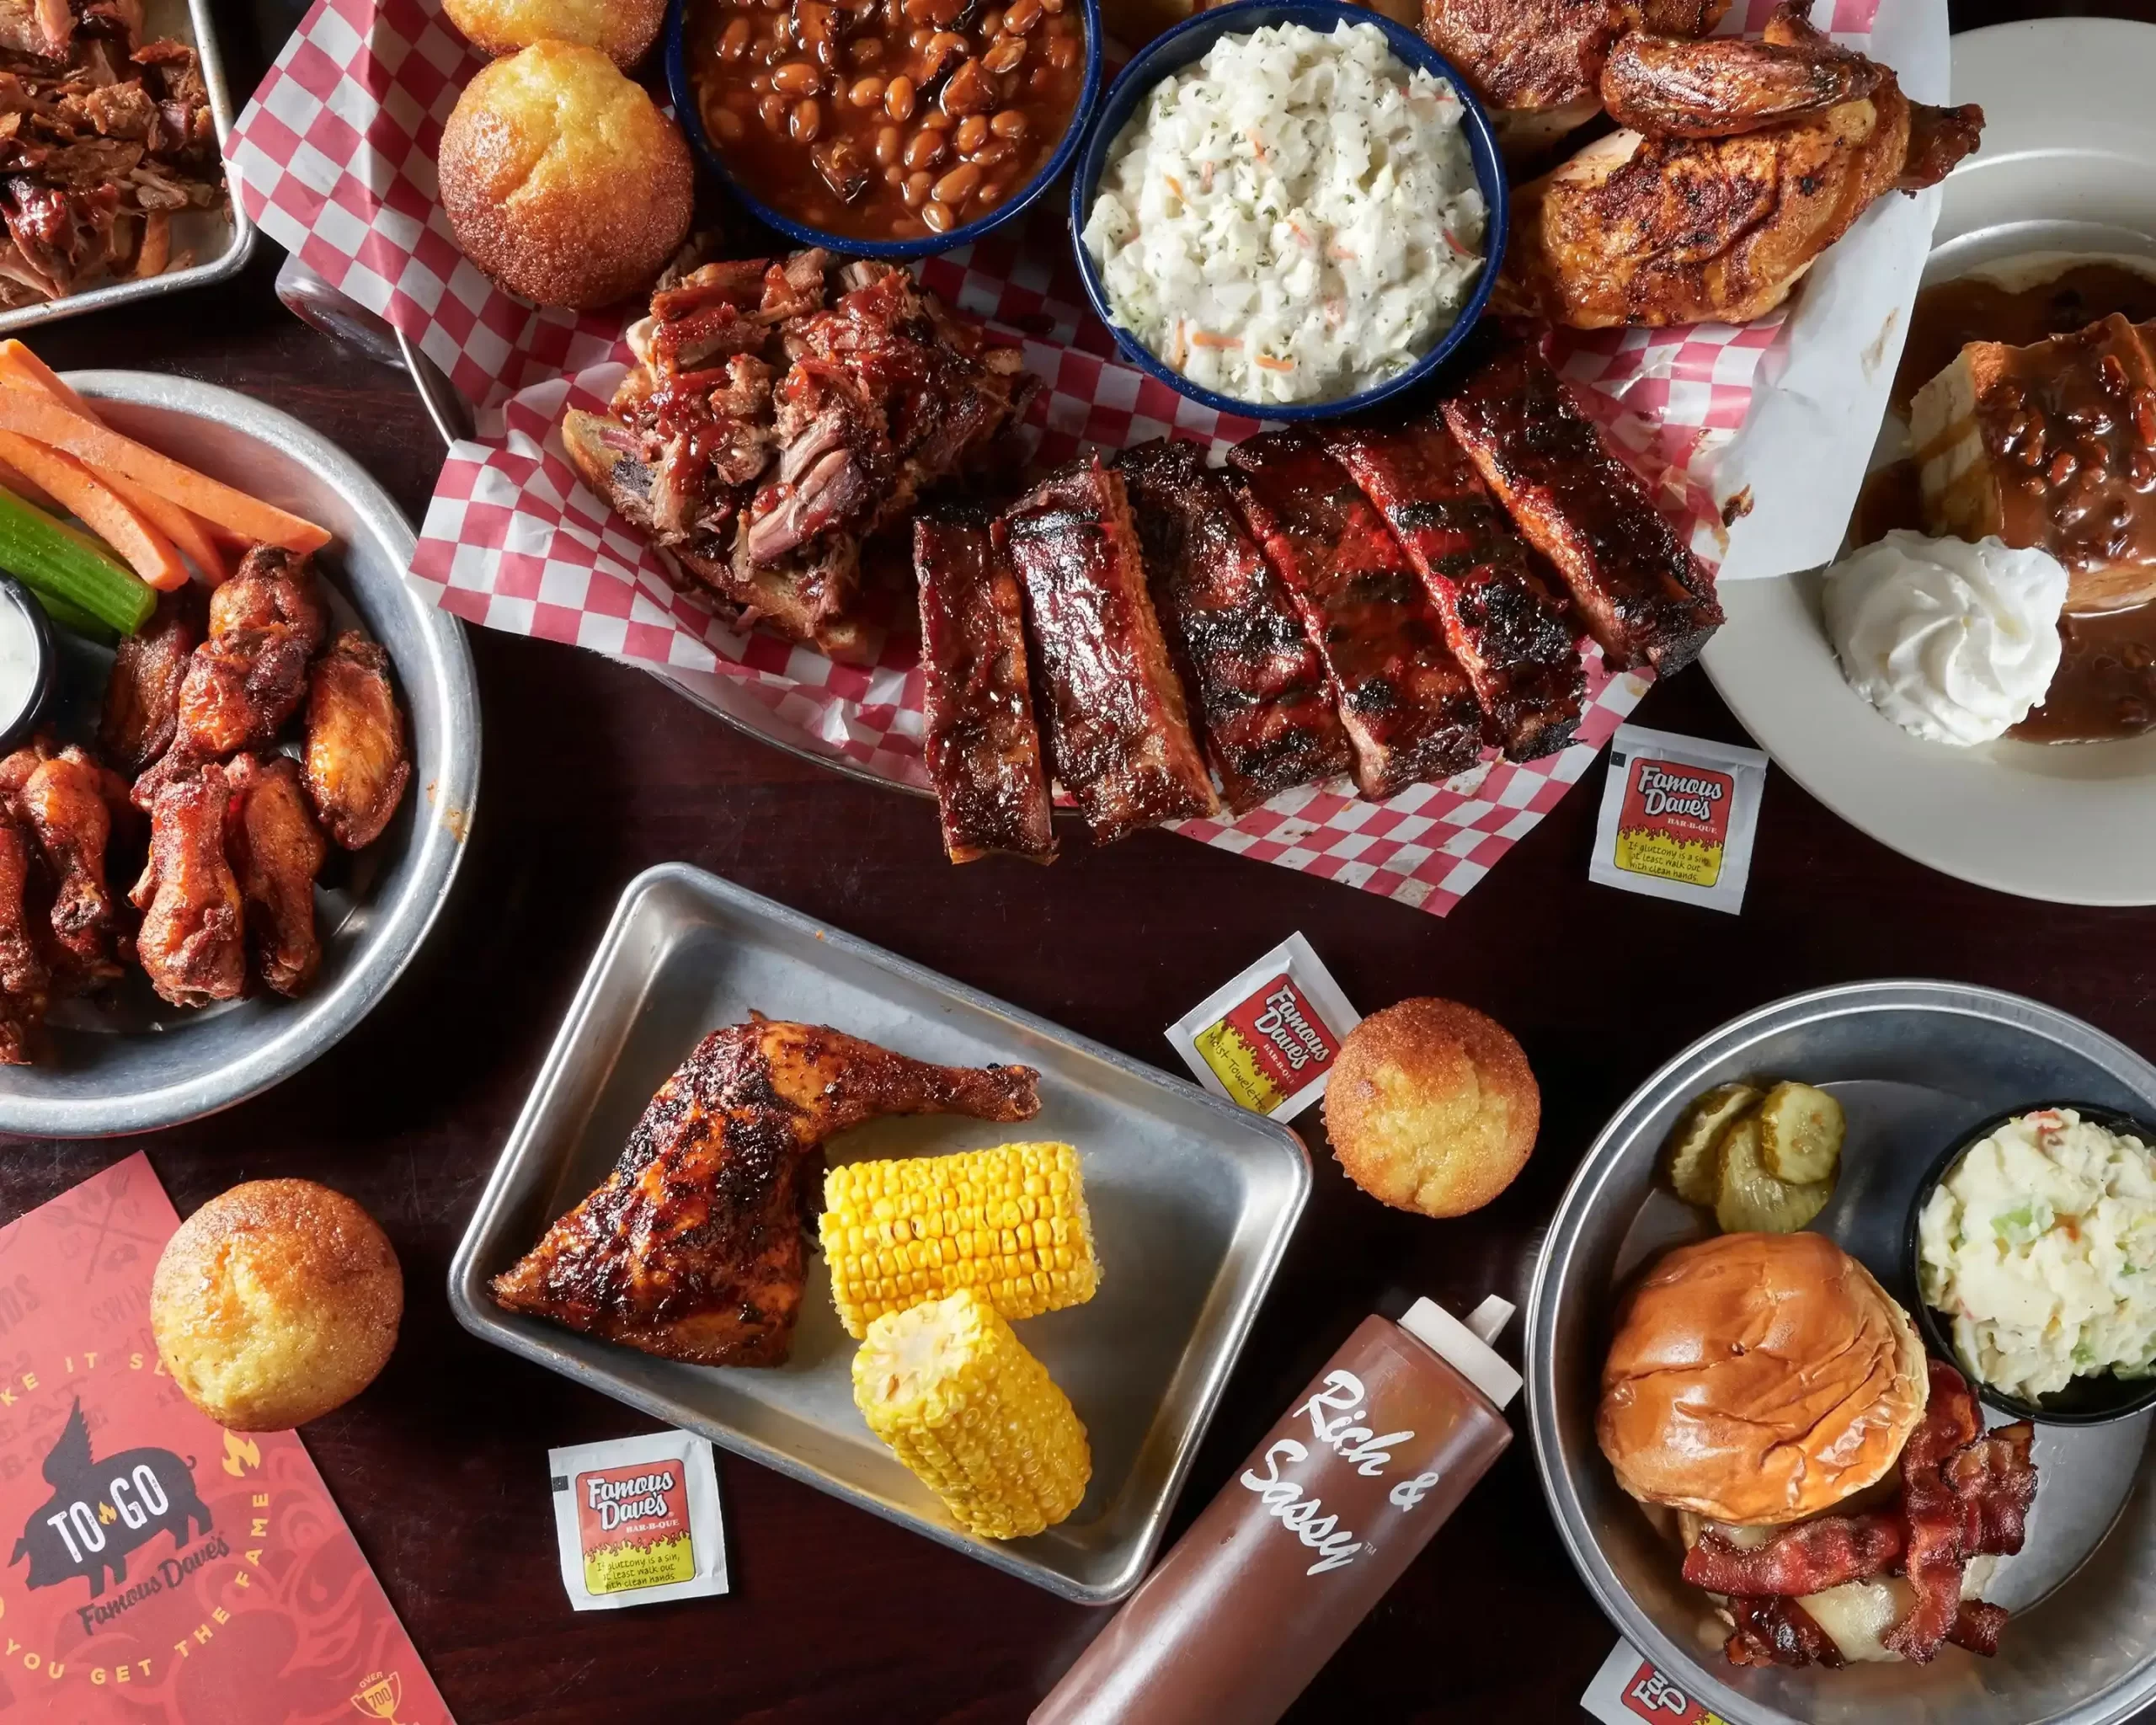 Famous Dave's BBQ